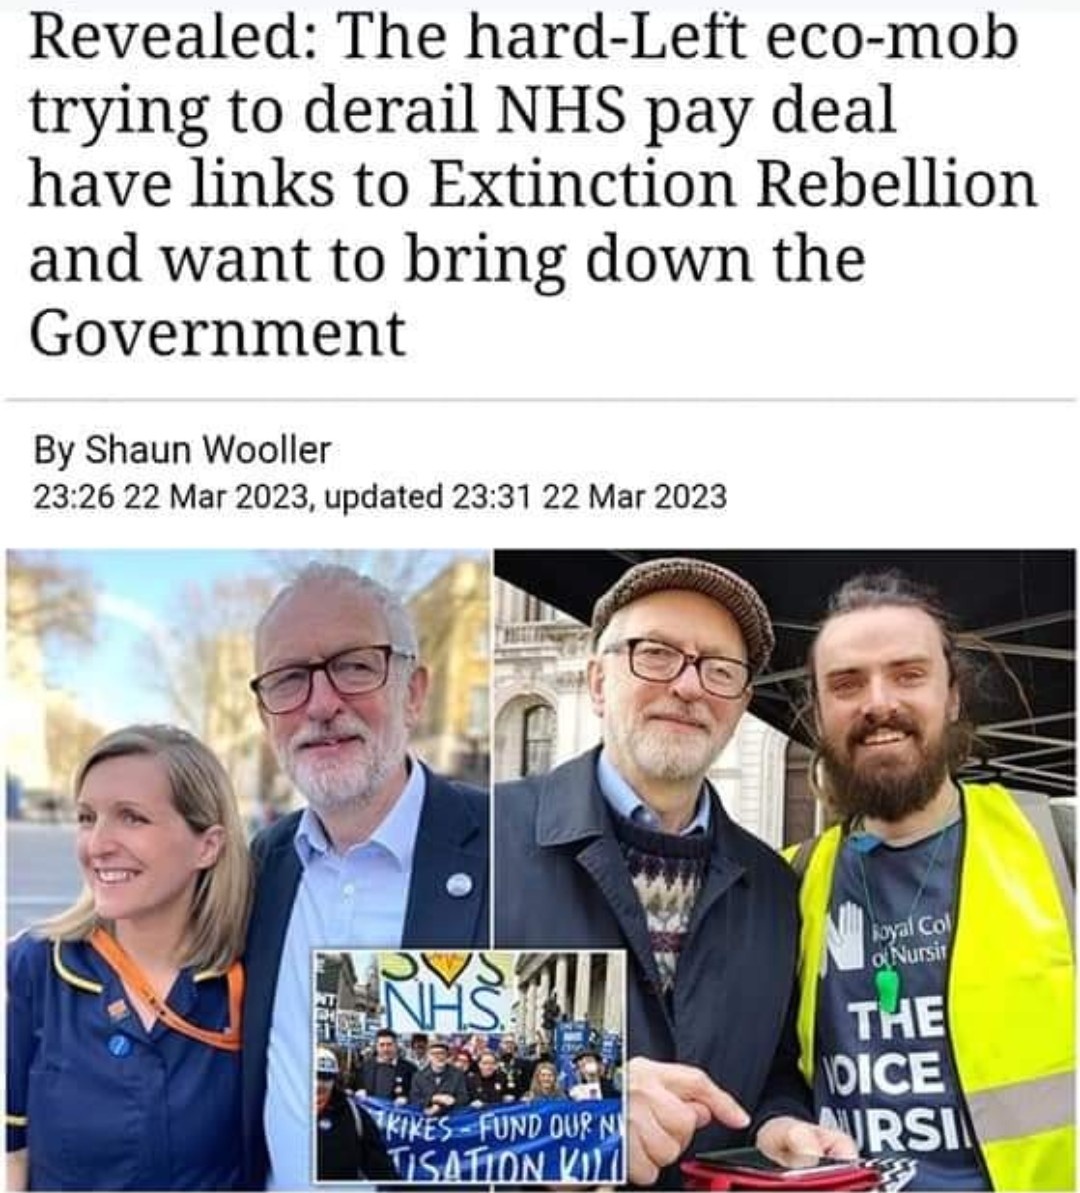 I have been compensated by the Daily Fail for using my photo without consent. I will be making a donation with their money to the following: - @TheBMA strikefund - @RefugeeAction - @corbyn_project Their hate money will fund refugees, striking Doctors, Corbyn's peace project